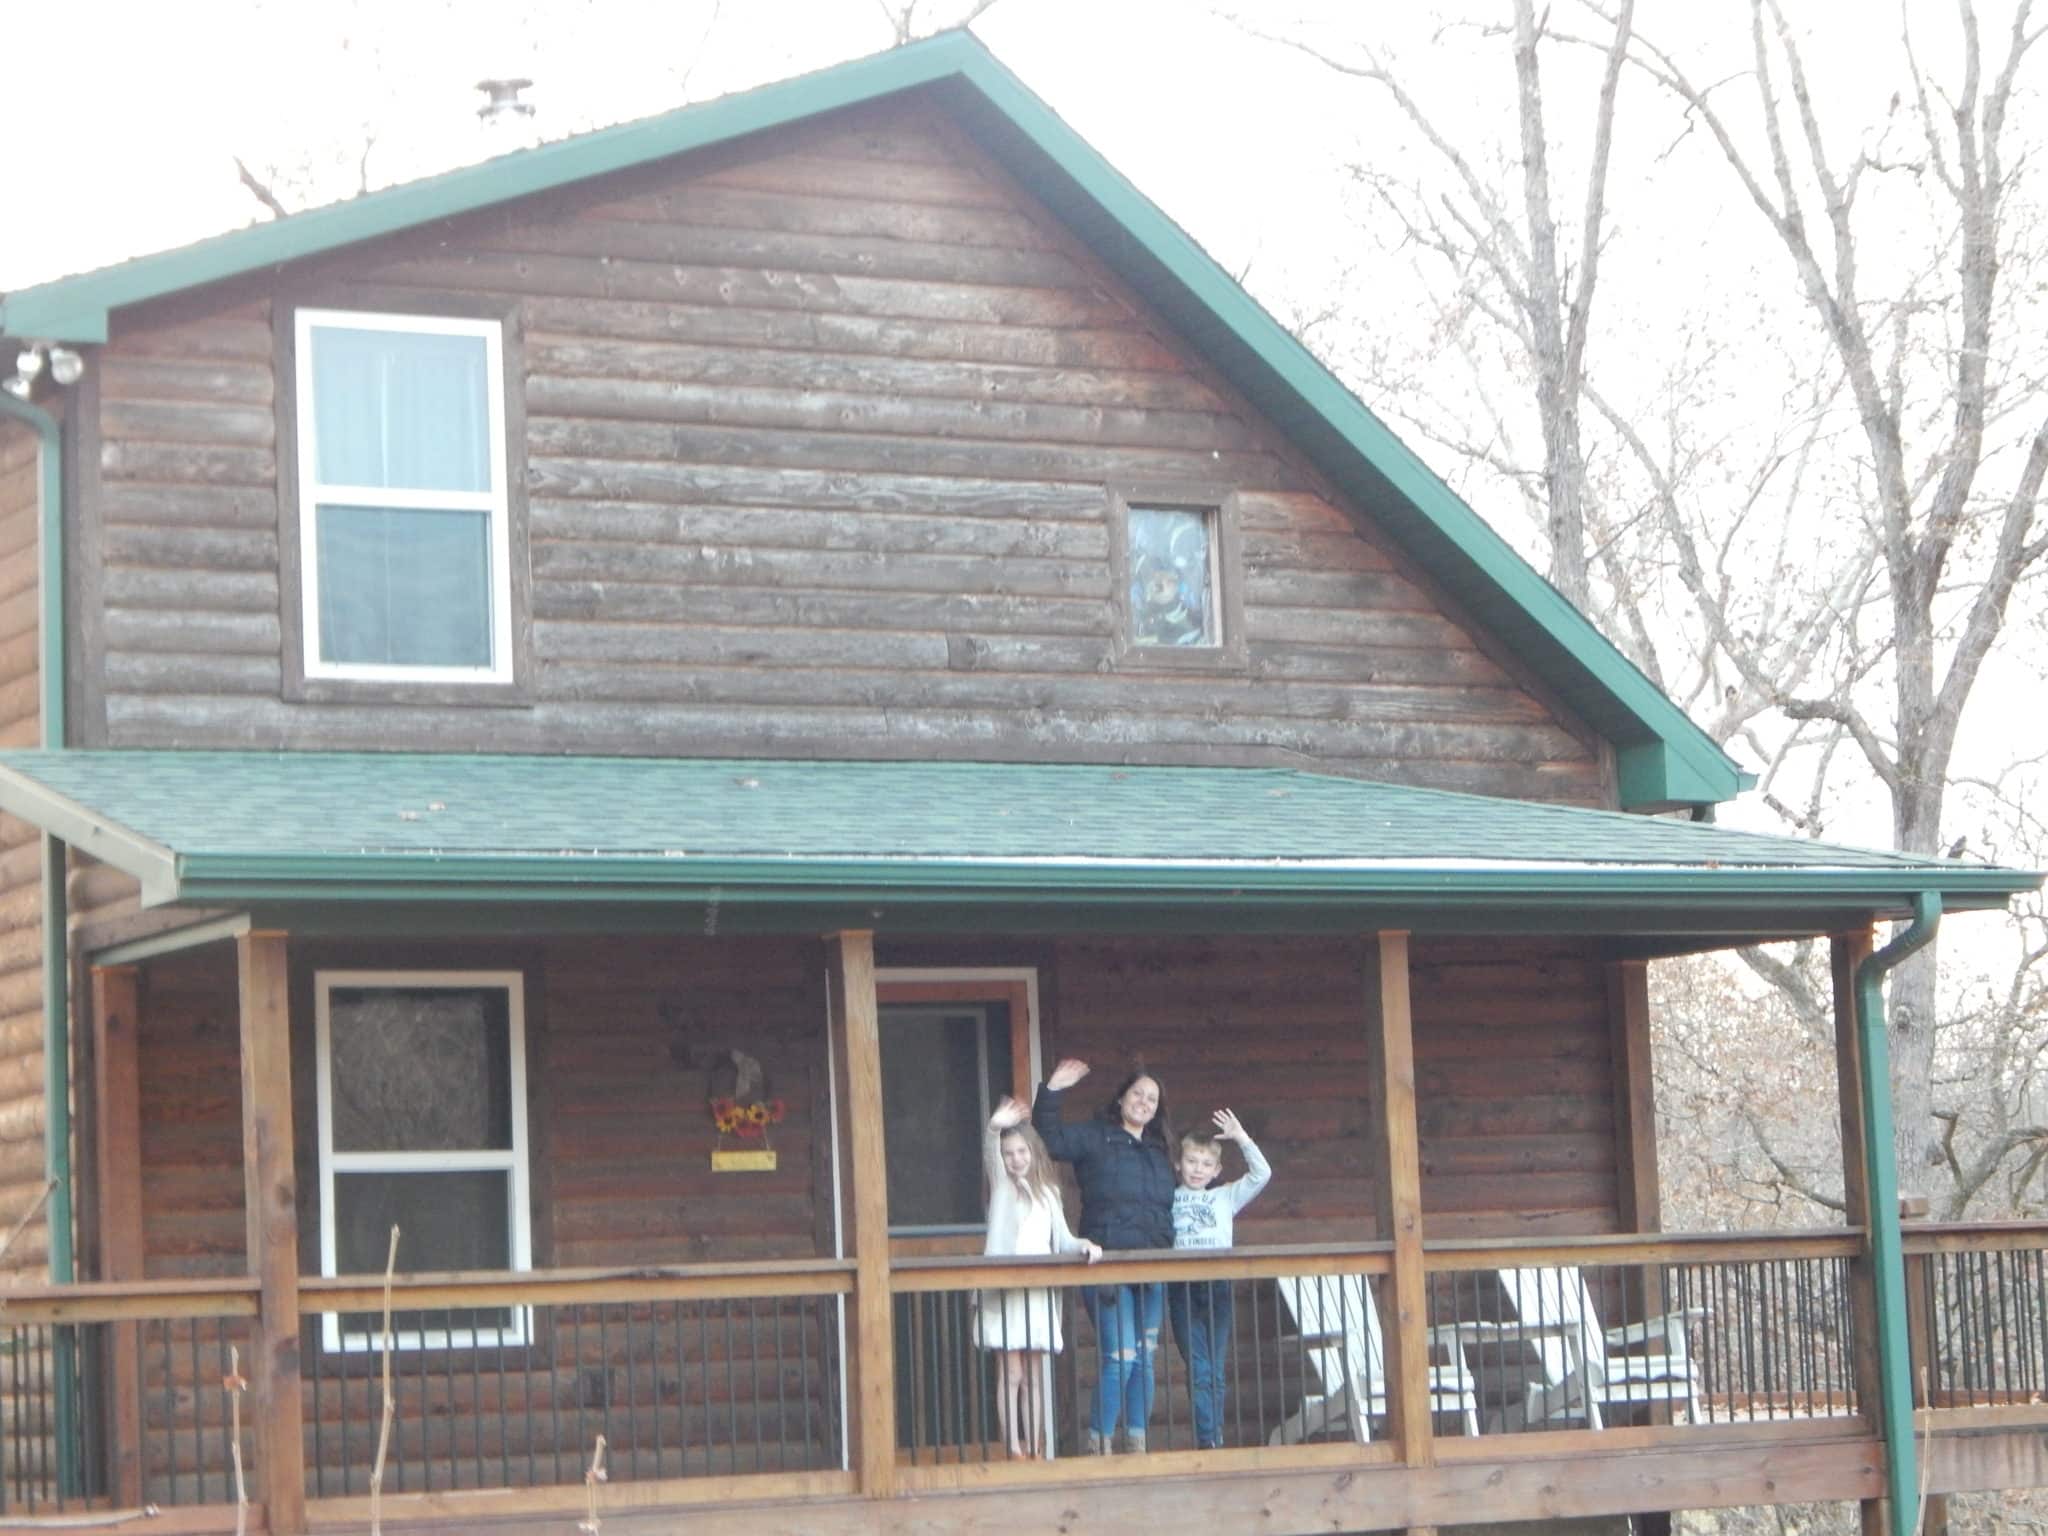 Woman and two children waving from the front porch of cabin.